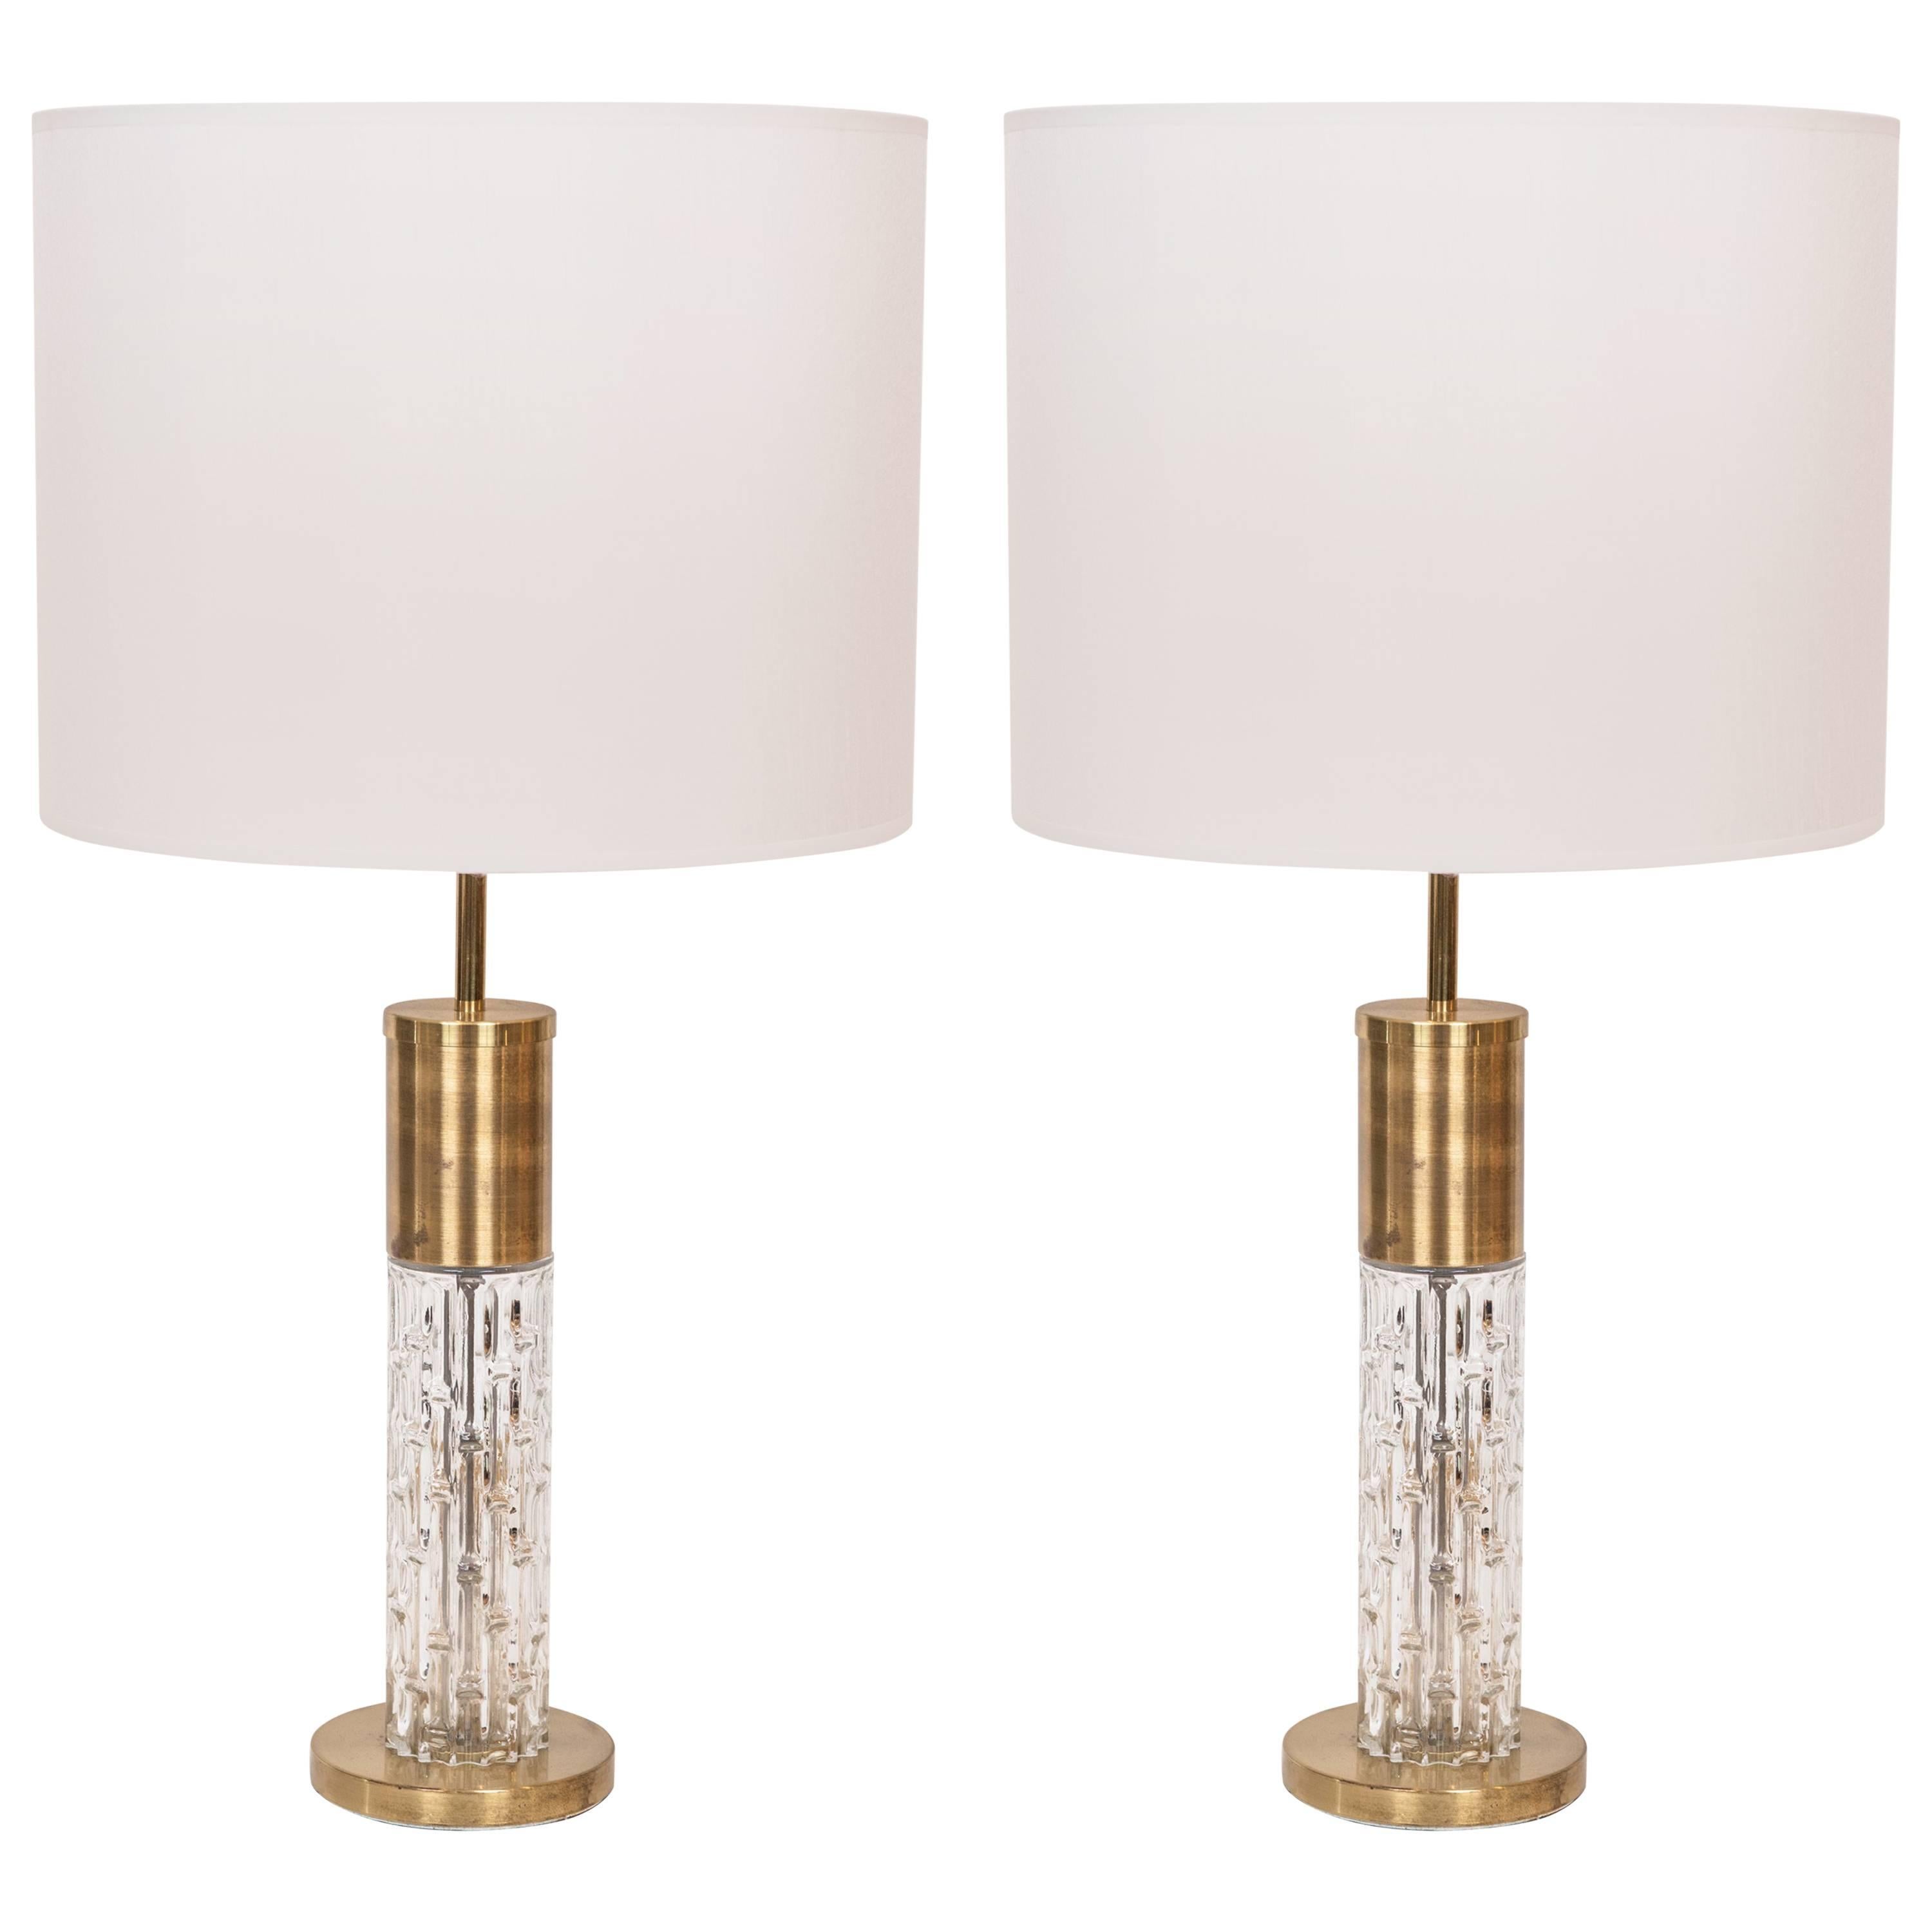 Pair of Vintage Brass and Glass Table Lamps, circa 1965